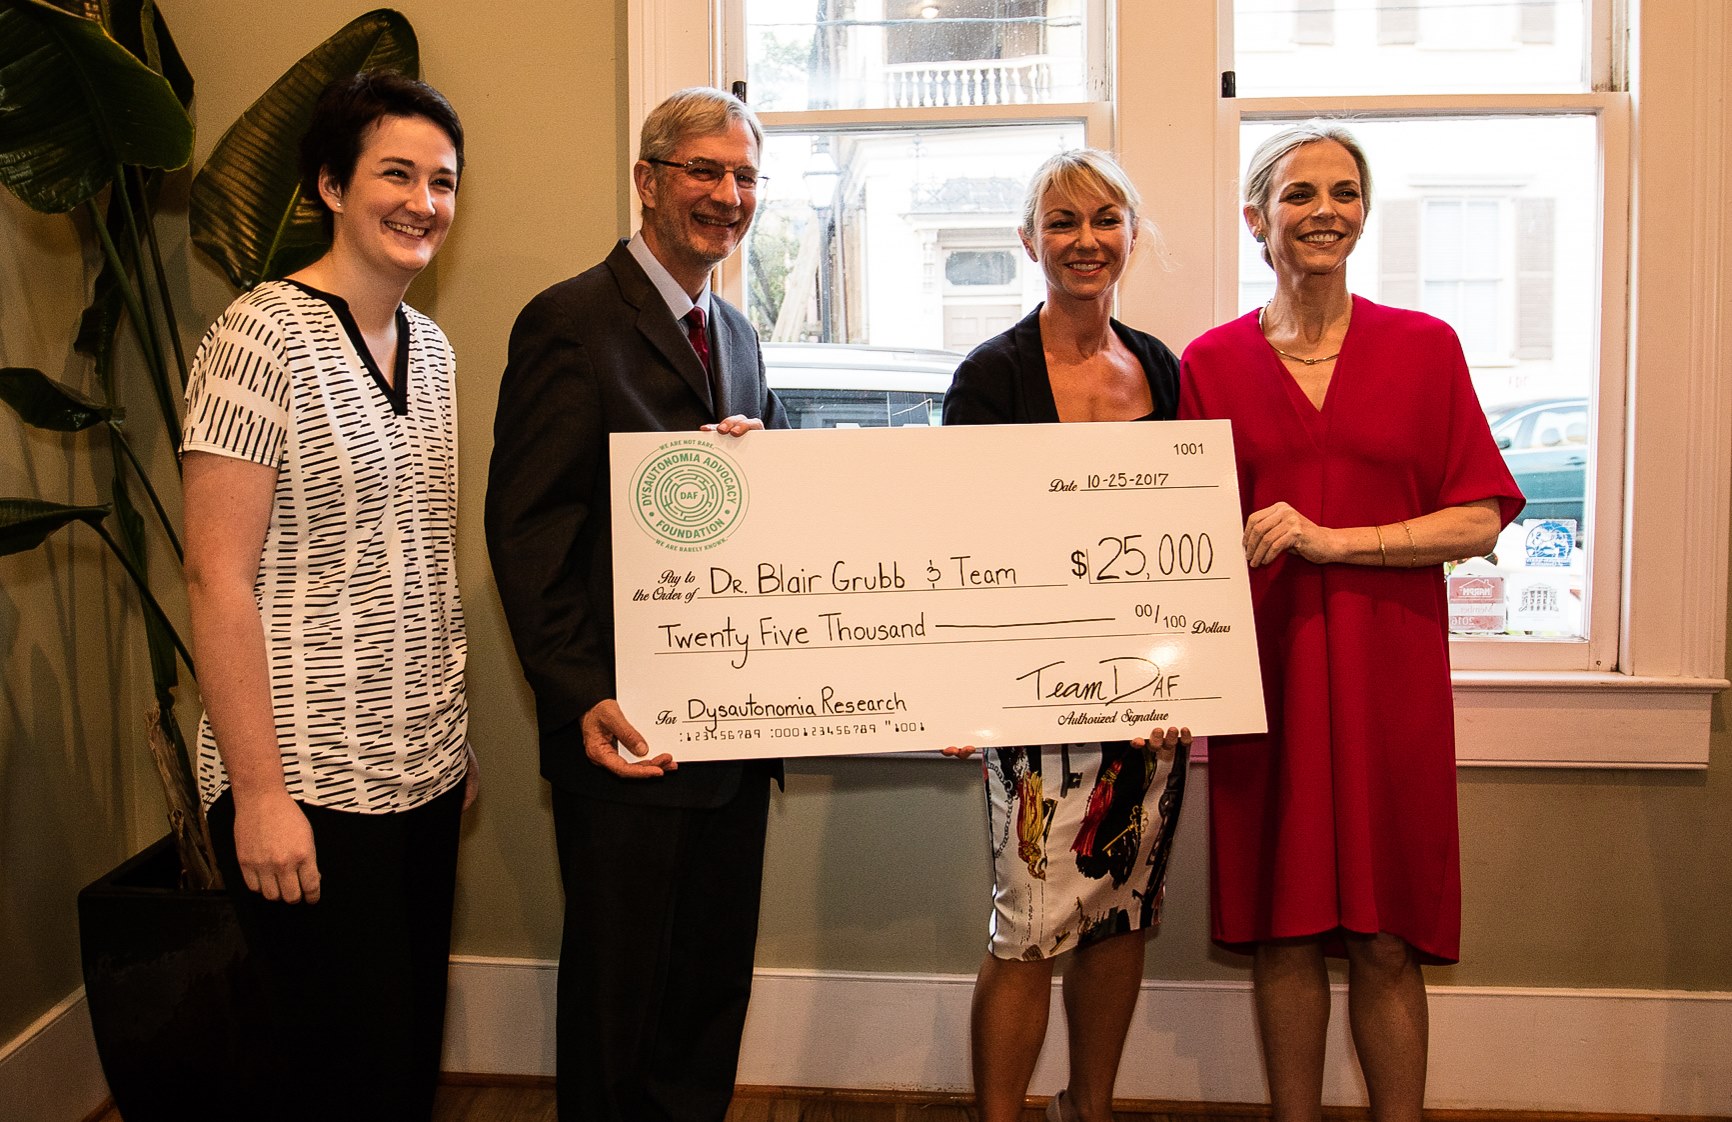 Sills (far left) presents Grubb his research grant in September of 2016.